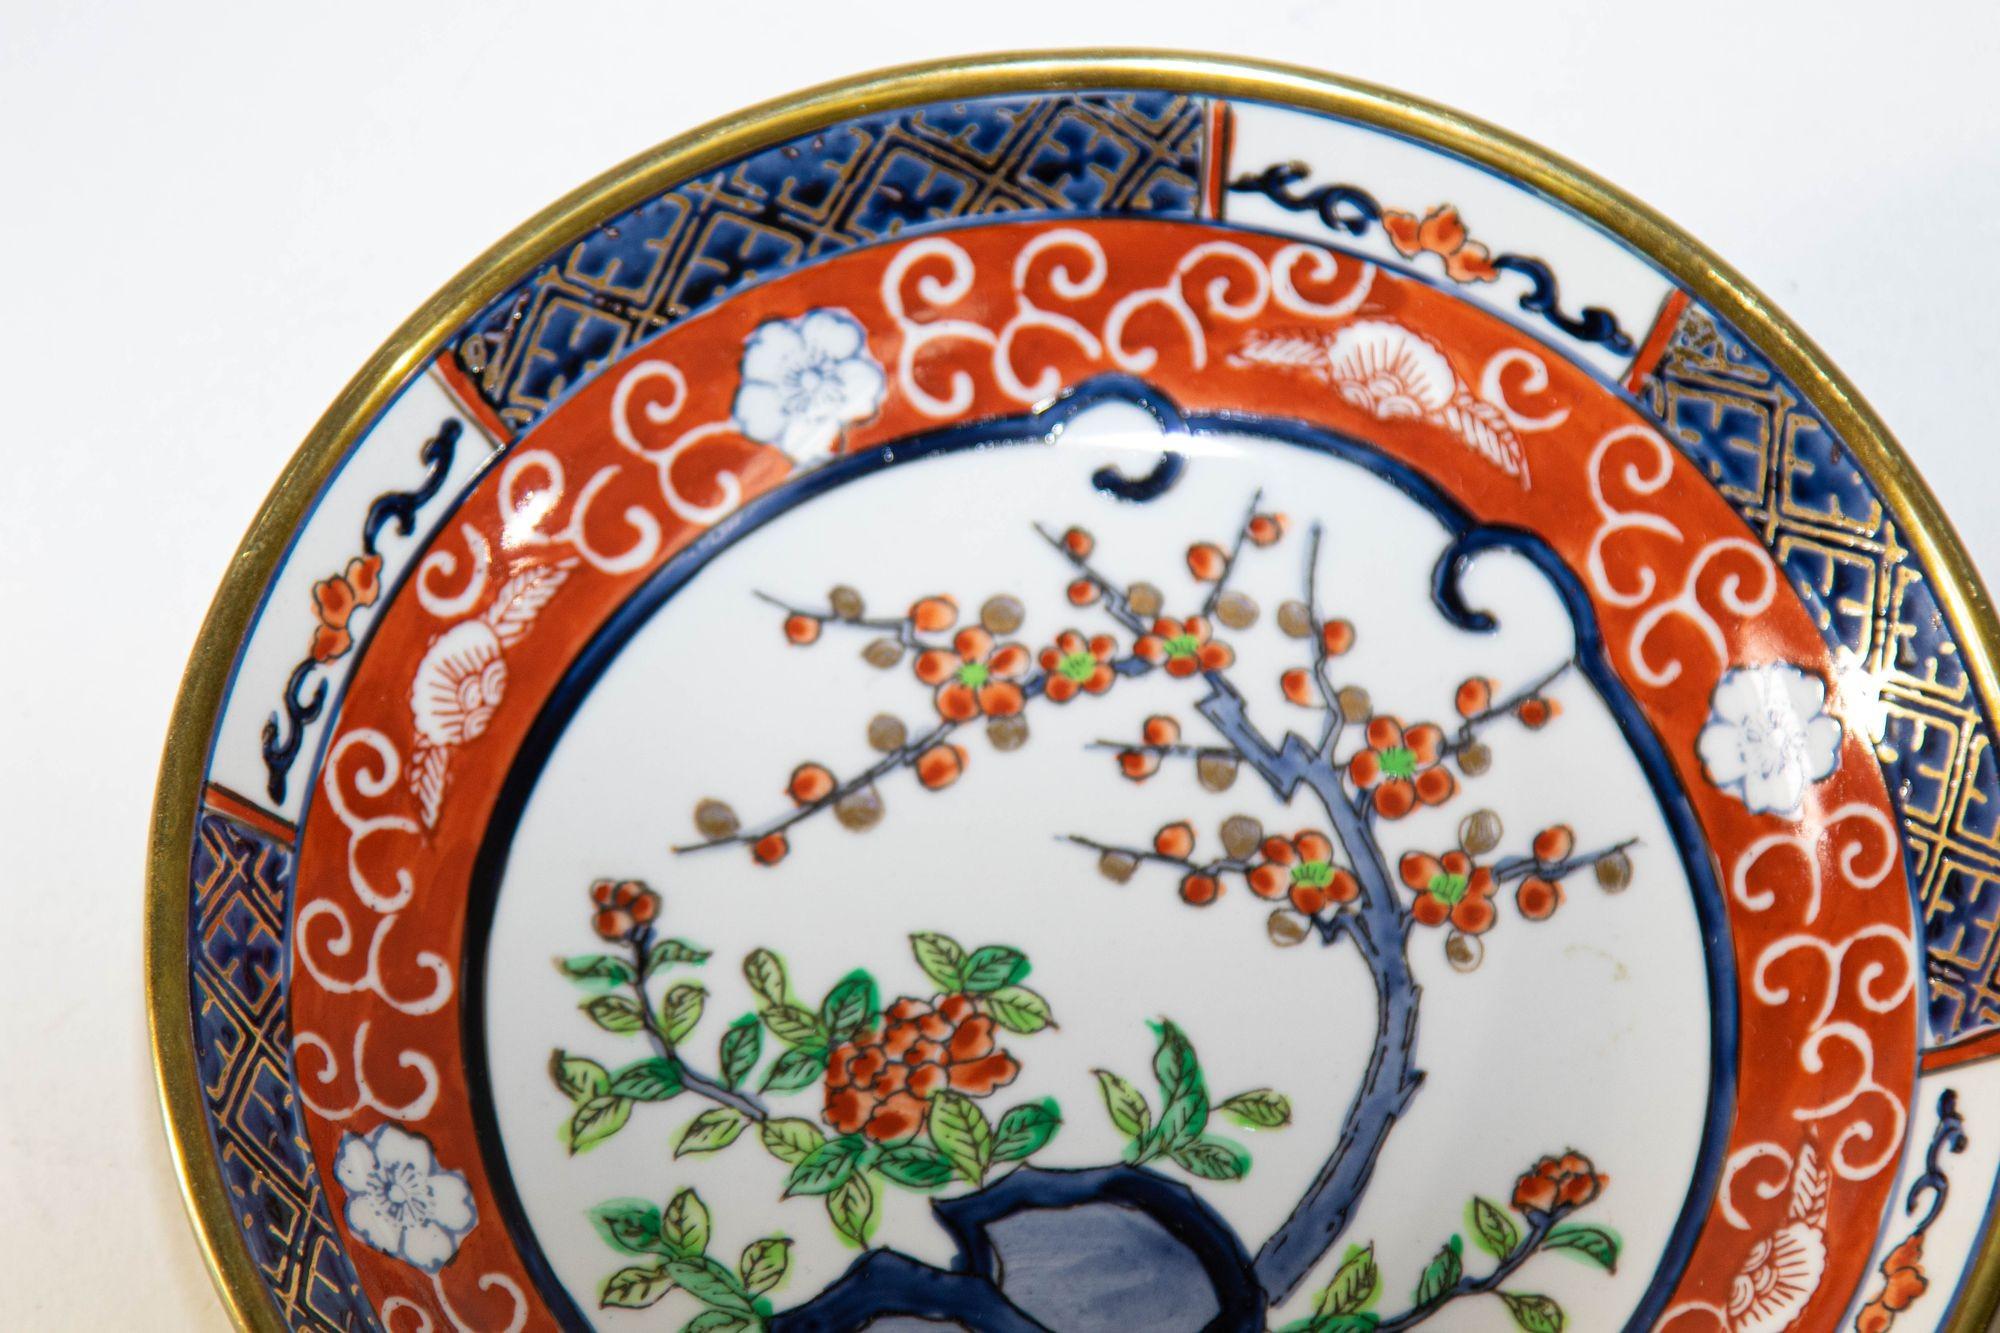 Hong Kong Vintage Japanese Imari Porcelain Bowl Hand-Painted for Geary's Beverly Hill For Sale